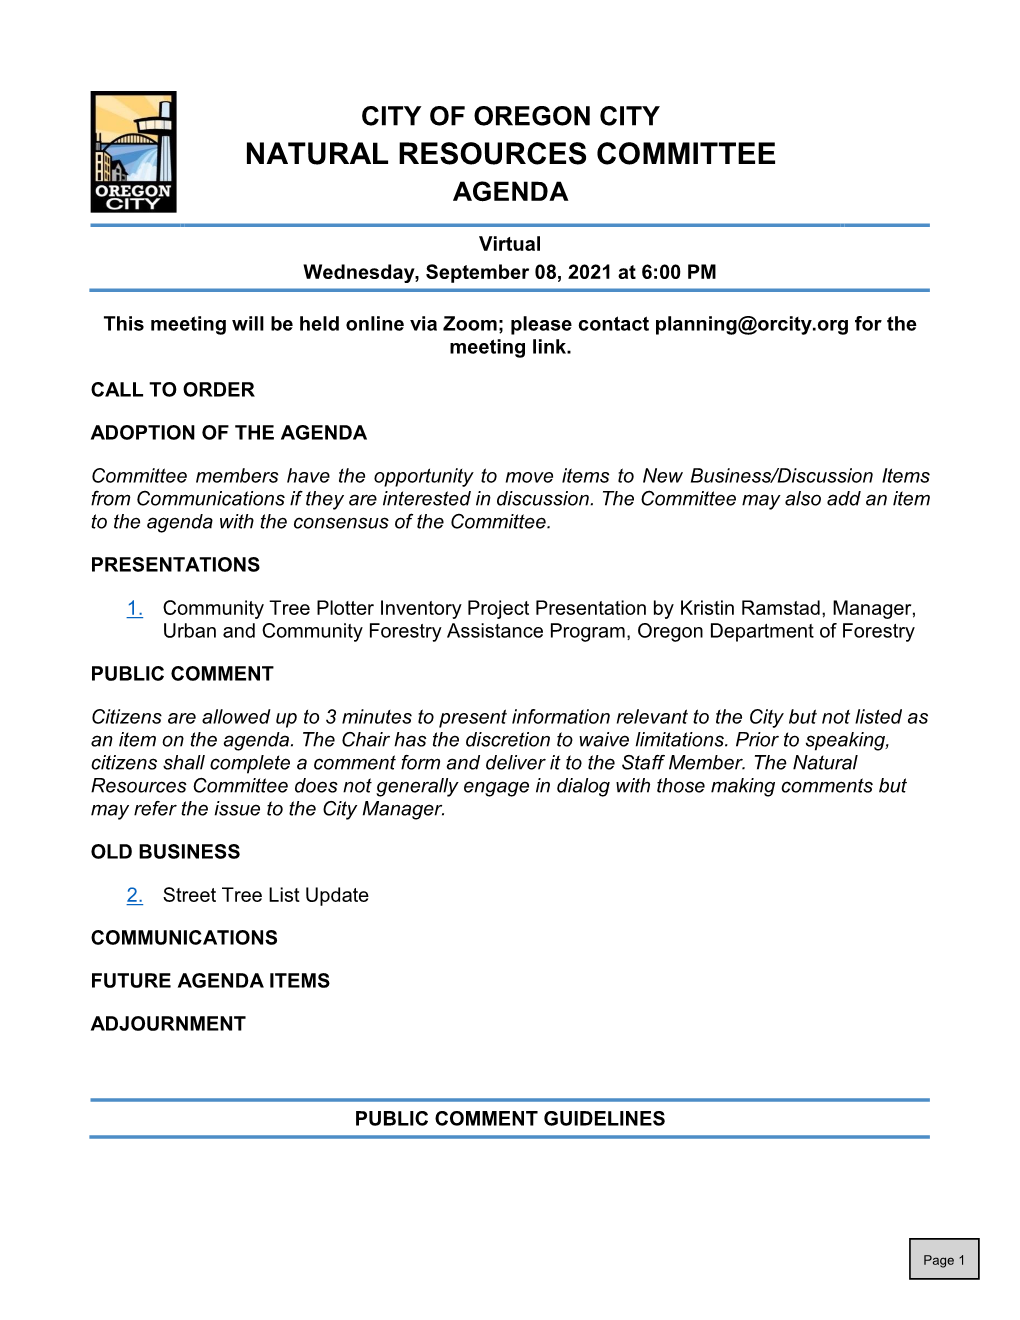 Natural Resources Committee Agenda